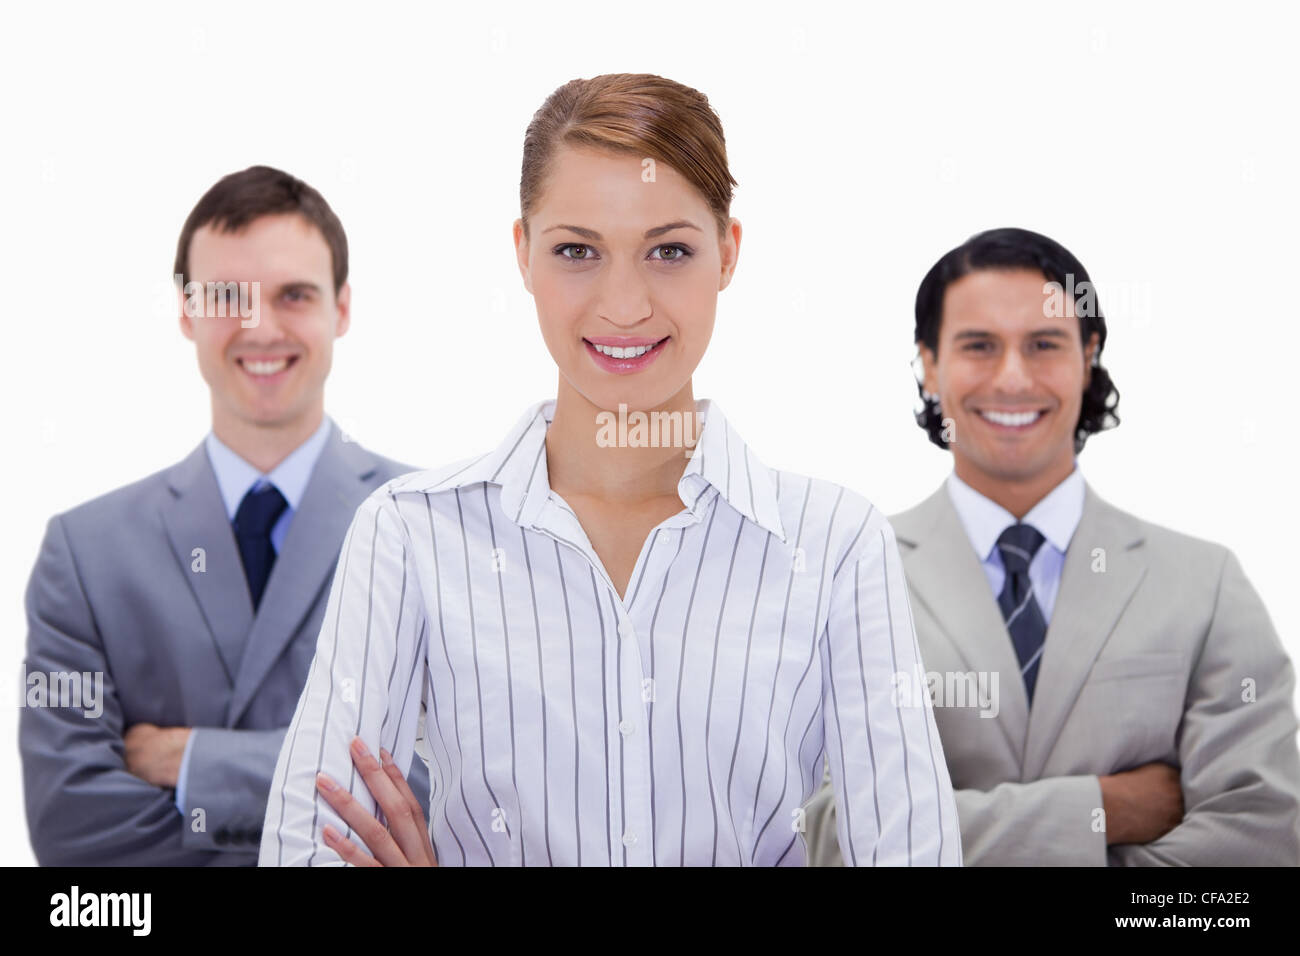 Smiling Business team with arms folded Stock Photo